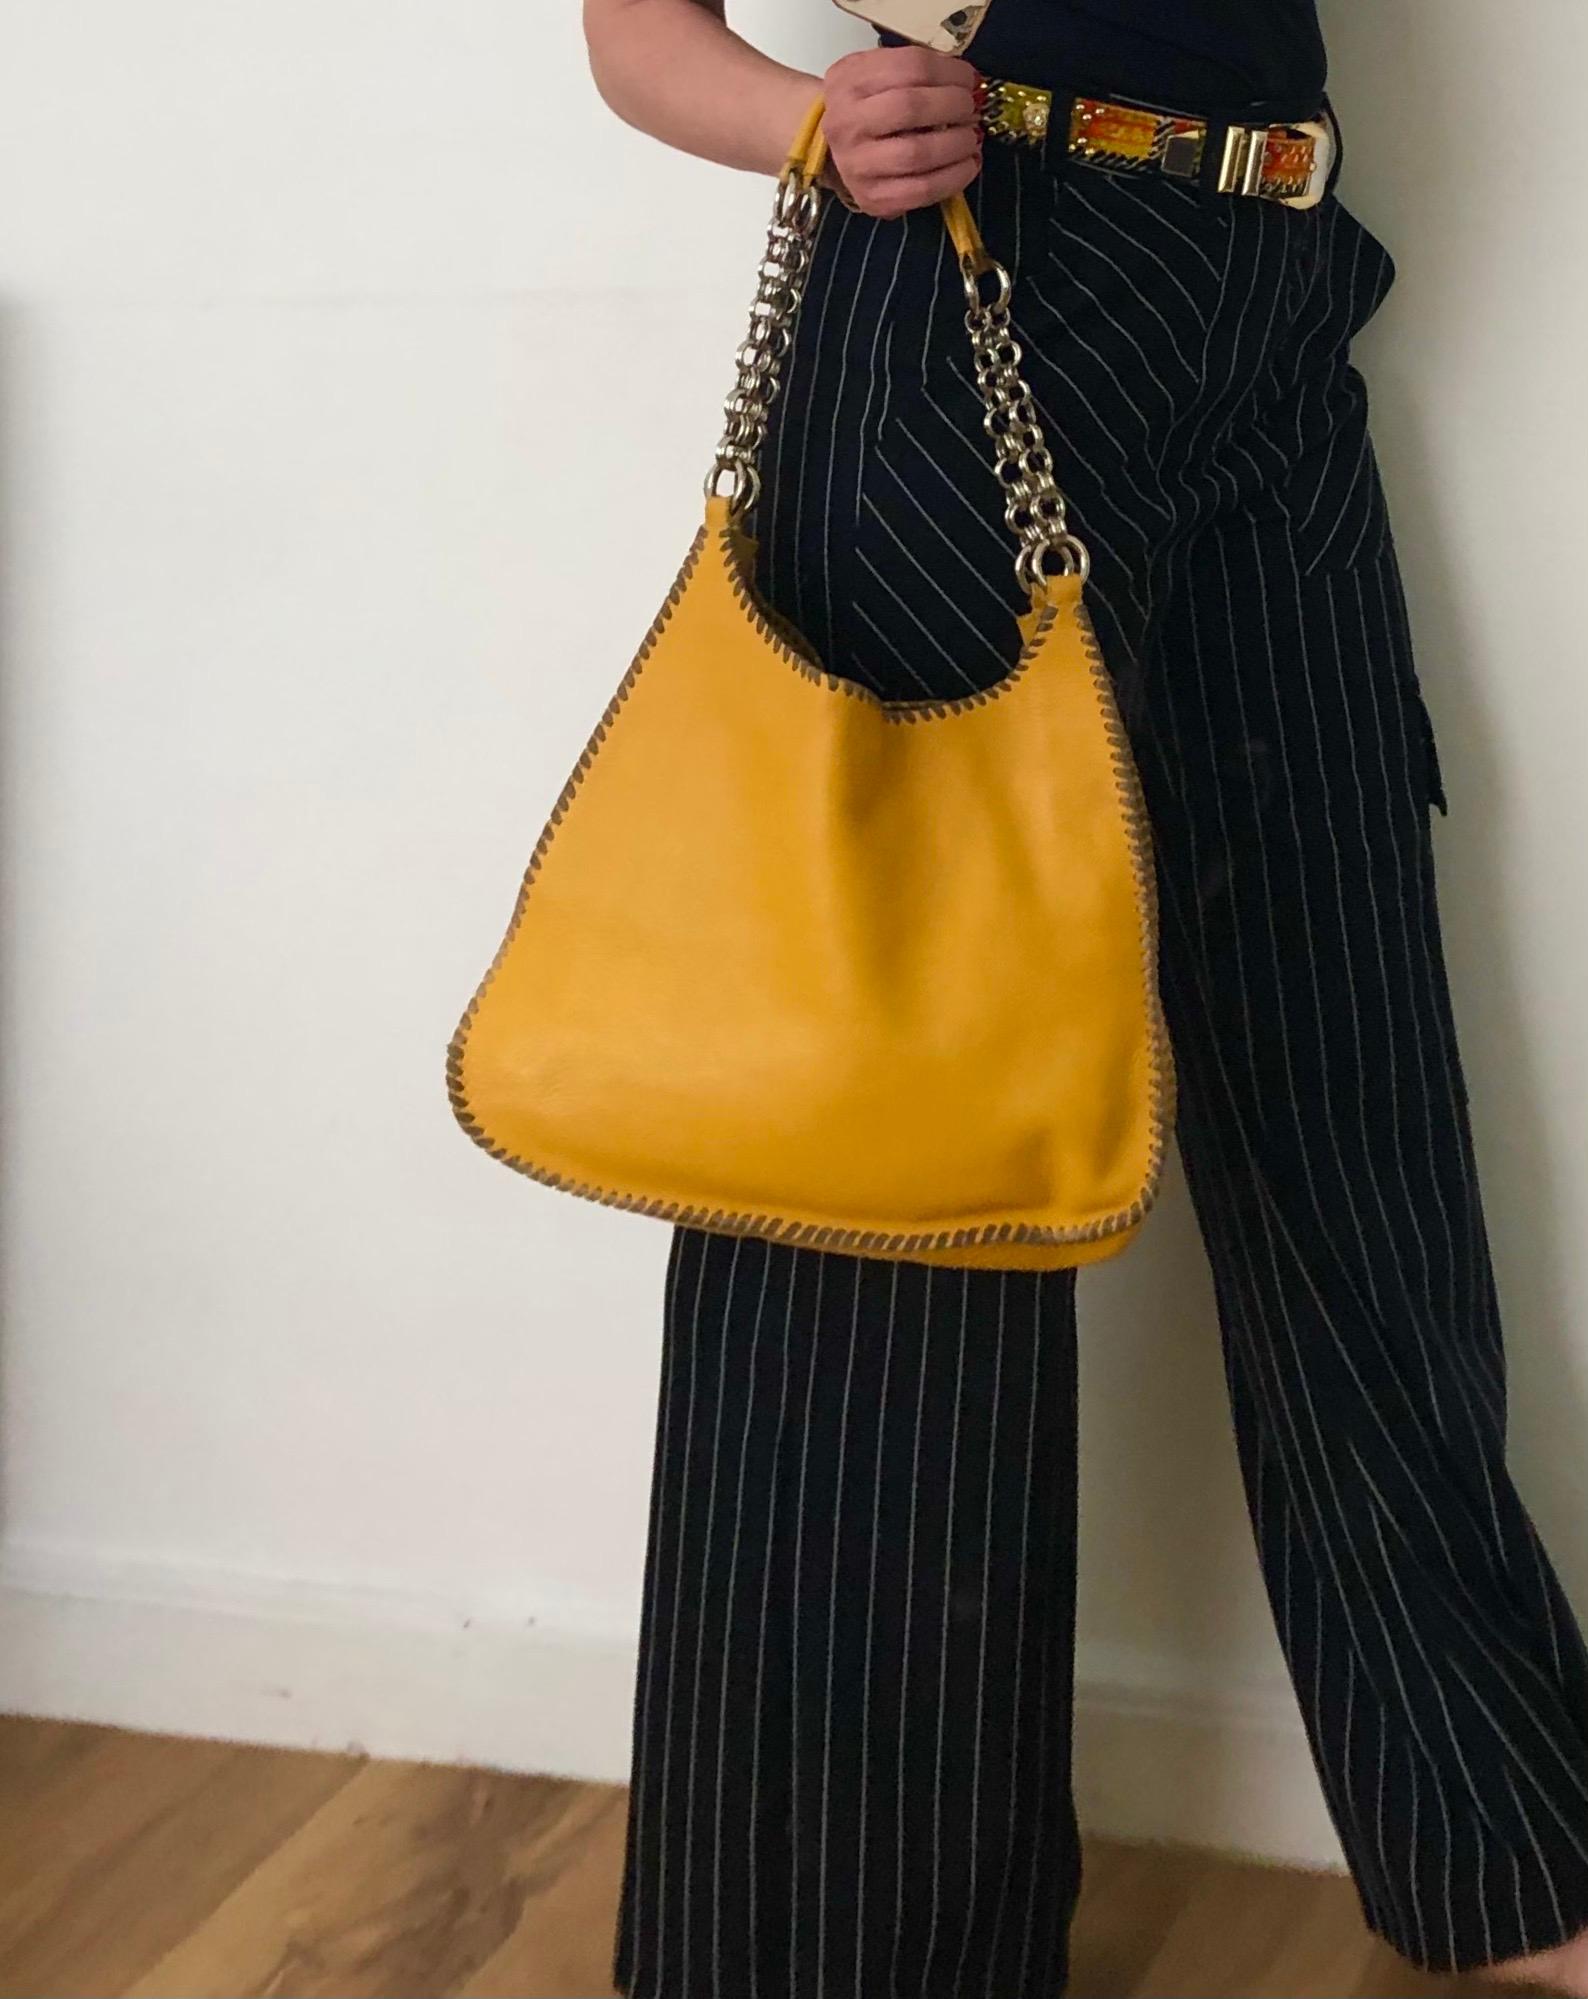 FREE UK and WORLDWIDE DELIVERY 

Madras Leather Prada hobo bag in bright Yellow featuring magnetic button closure and double shoulder straps with part chain and part leather straps. It also has an internal zip pocket and lovely stitching detail all